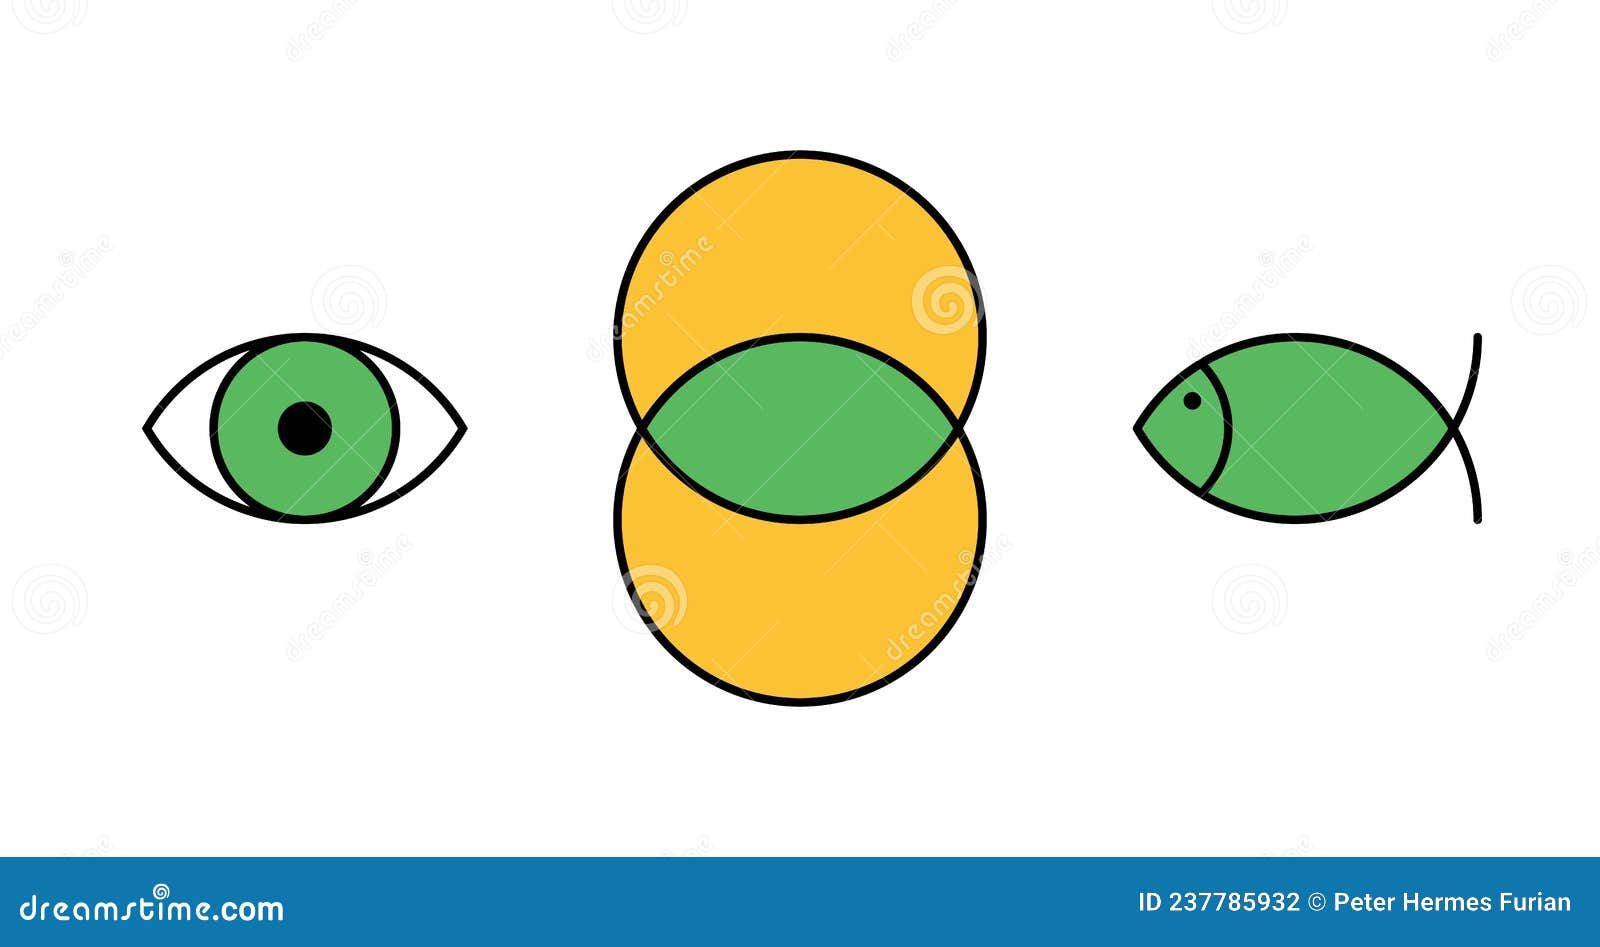 vesica piscis, basic form for an eye and ichthys, the jesus fish 